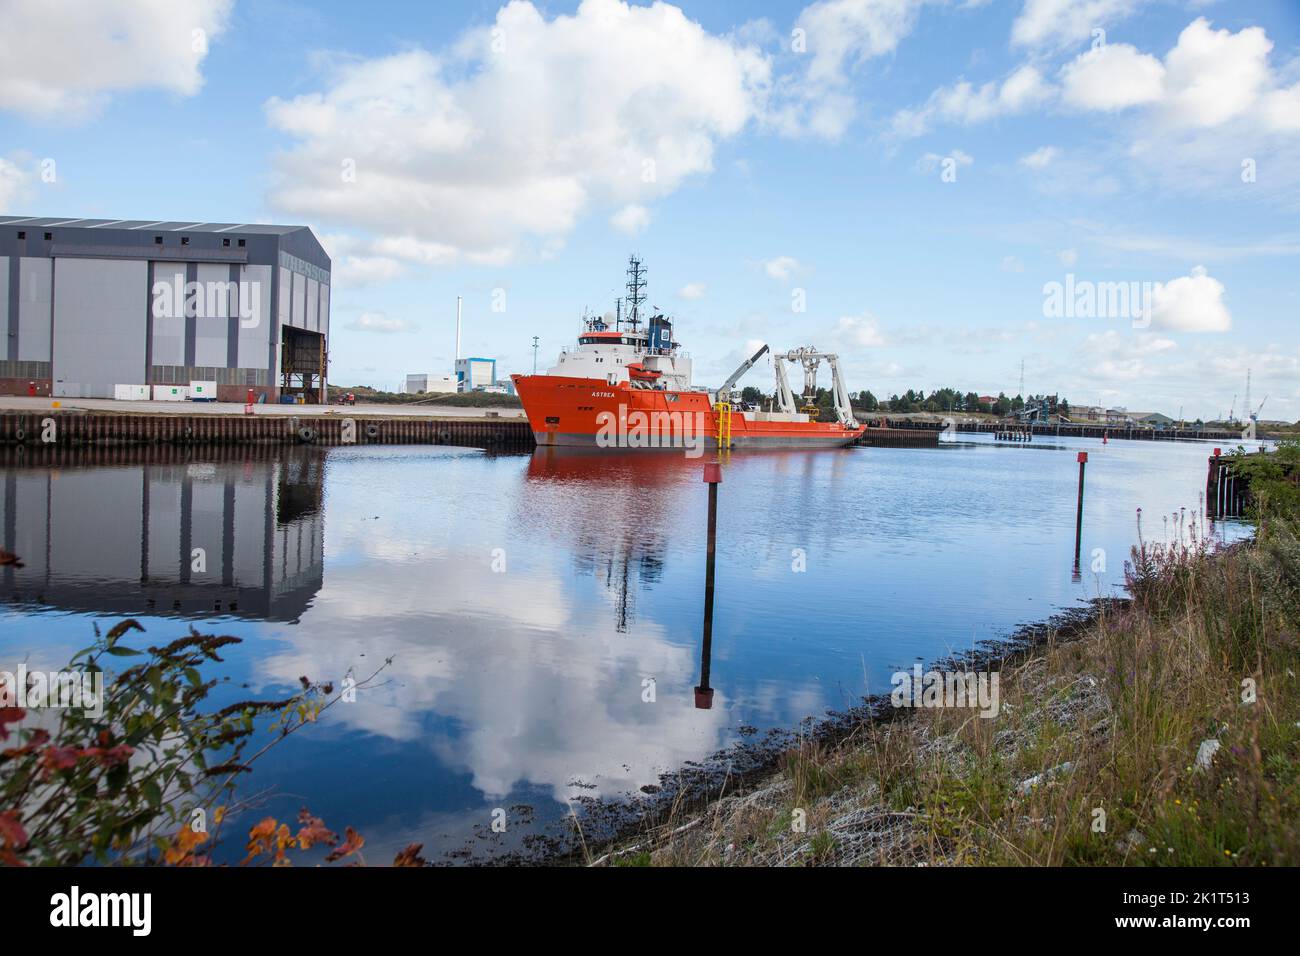 MPSV Astrea, an Offshore supply vessel, berthed on the River Tees at Middlehaven,Middlesbrough,England,UK Stock Photo